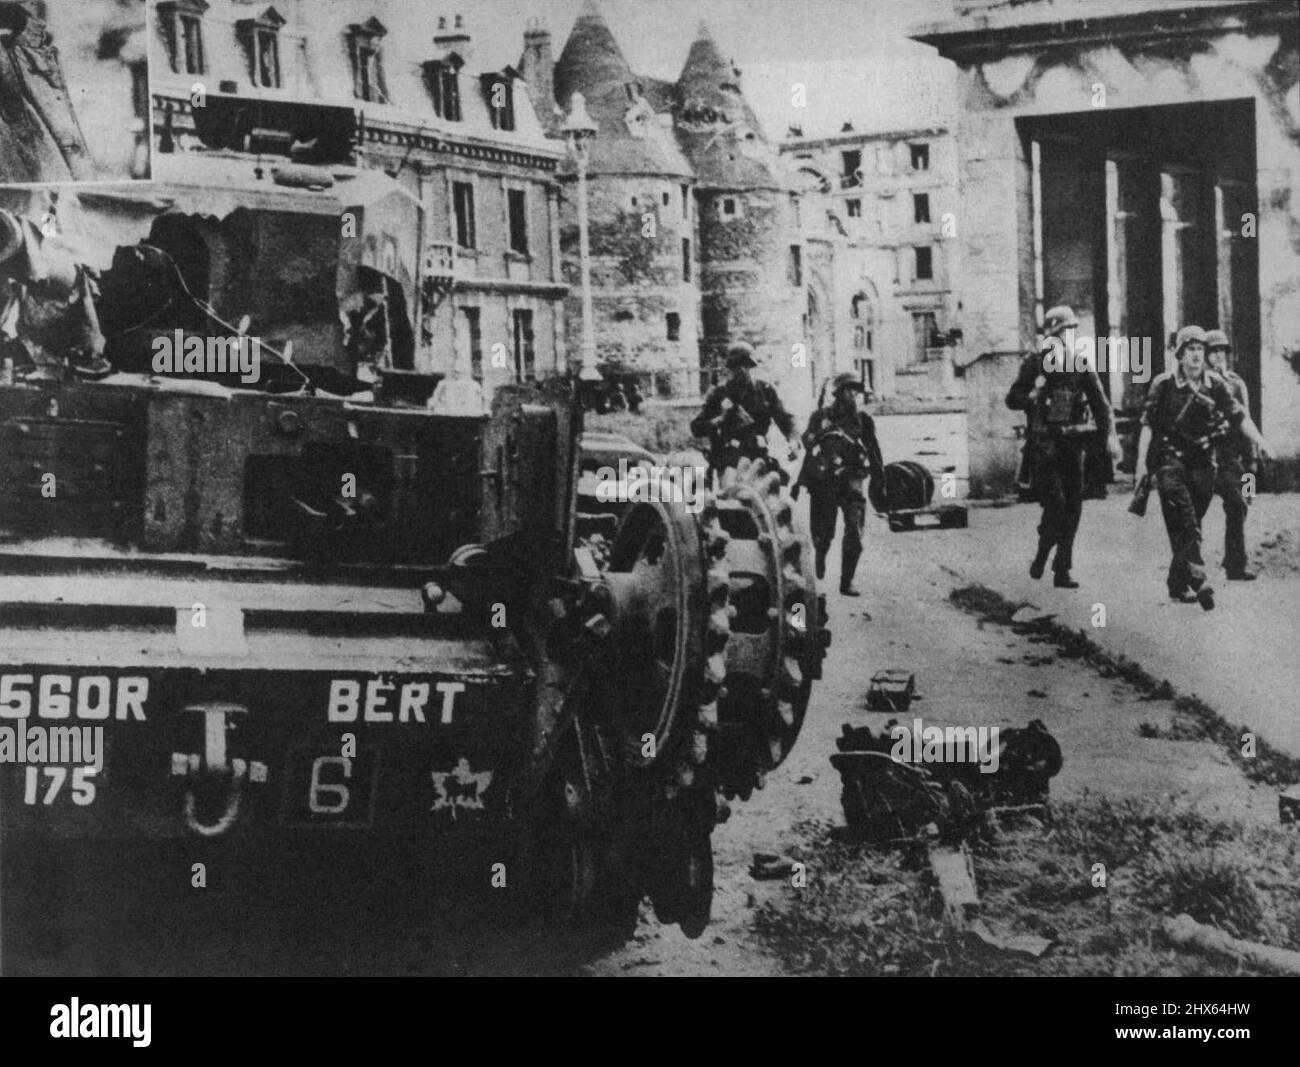 German Pictures of the Dieppe Rain Just Received in London. One of the Canadian tanks which penetrated into the streets of the town. In spite of the success the tank had to be abandoned at the moment of disembarkation. November 10, 1942. (Photo by Keystone). Stock Photo